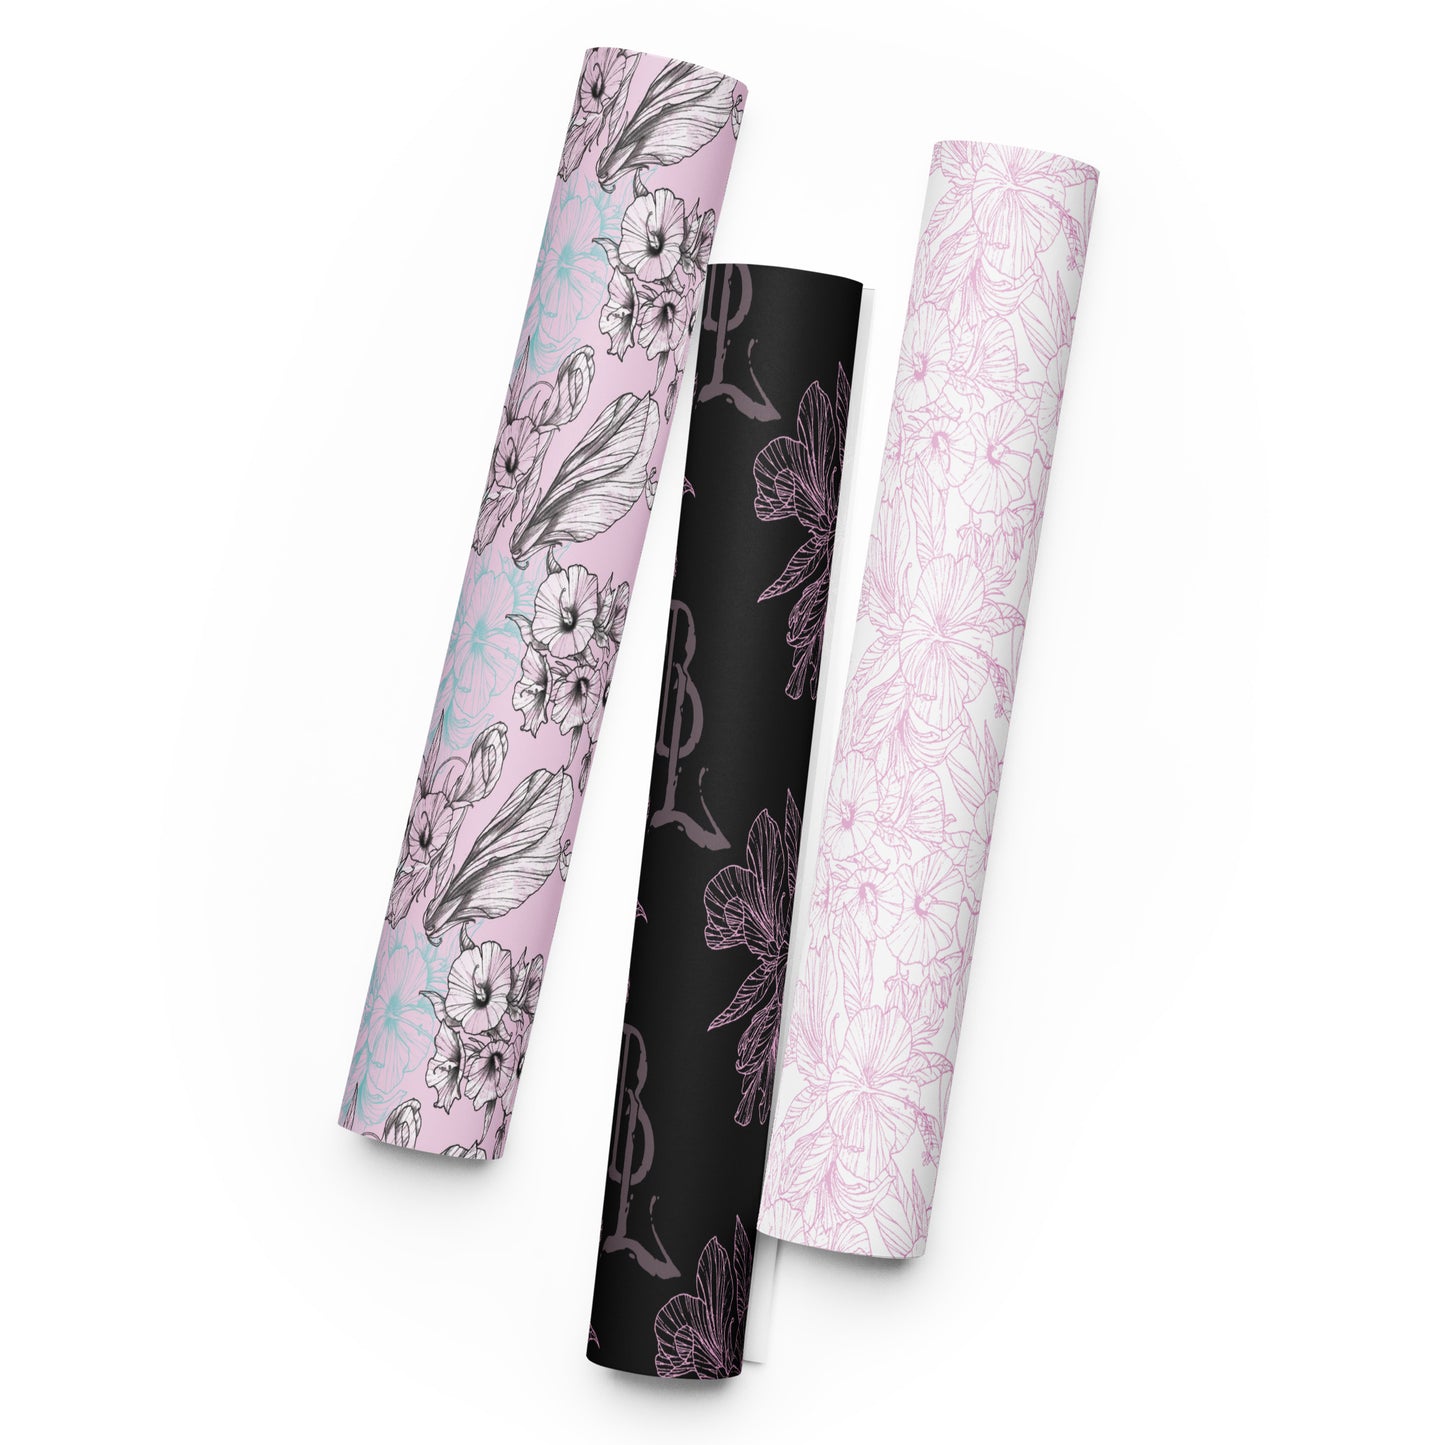 Hibiscus Paradise Wrapping paper sheets